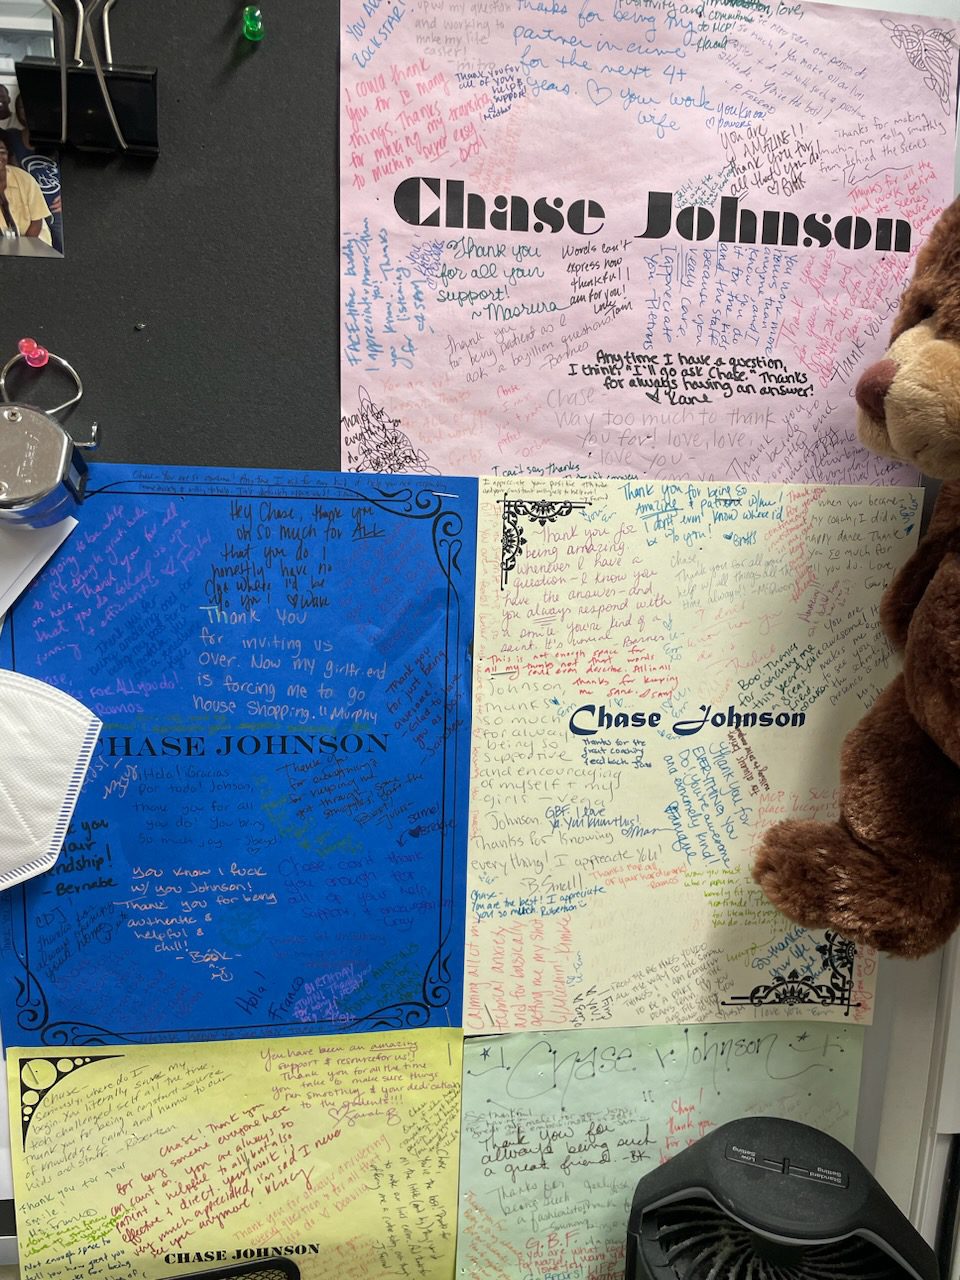 Image shows many gratitude cards with several messages for Muchin College Prep principal Chase Johnson